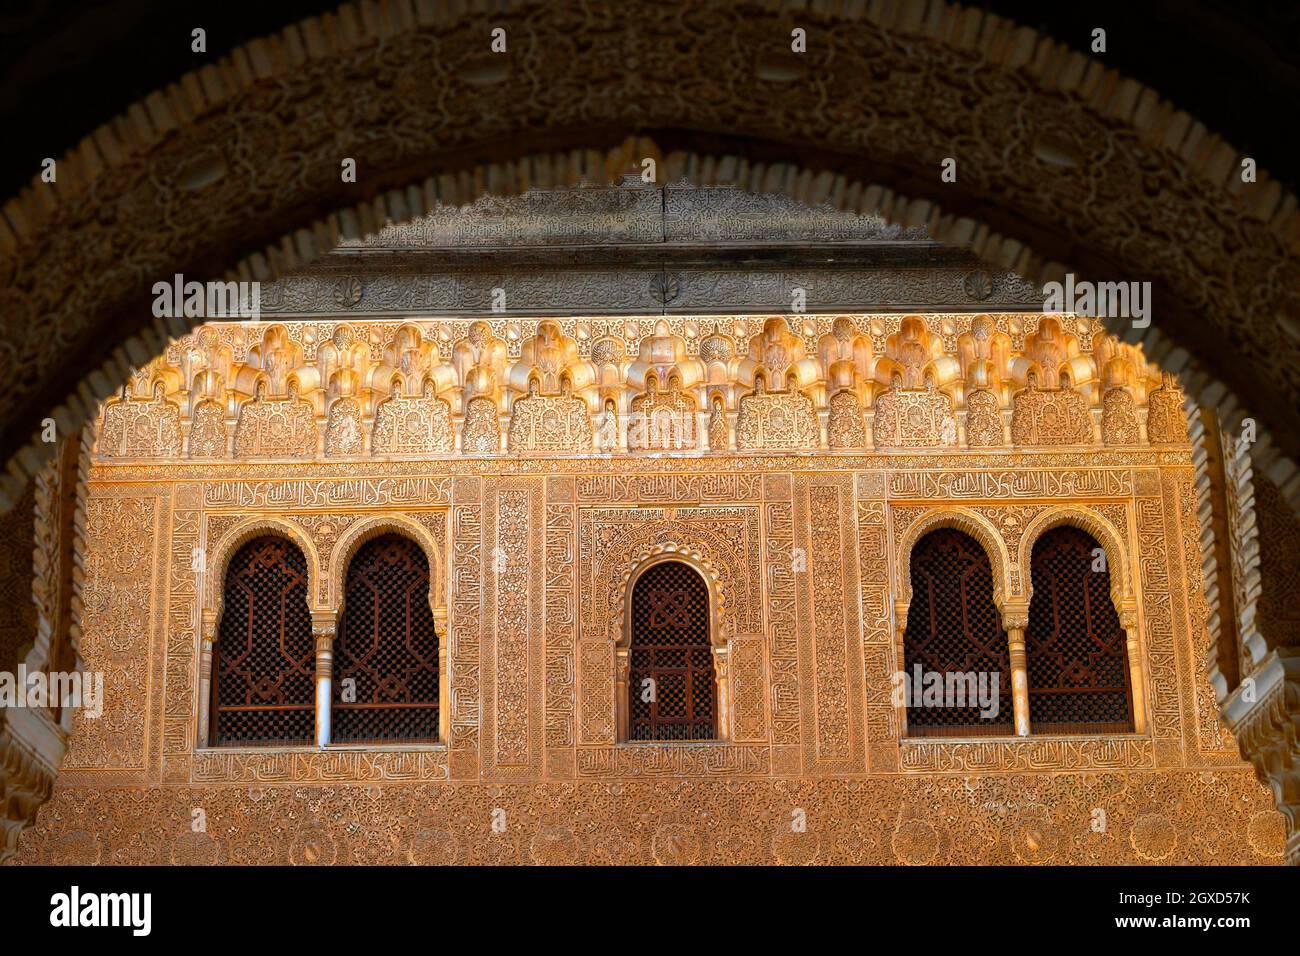 Ornate reliefs cover arches and walls in the Nasrid Palaces of the Alhambra in Granada , Andalusia,Spain. Stock Photo